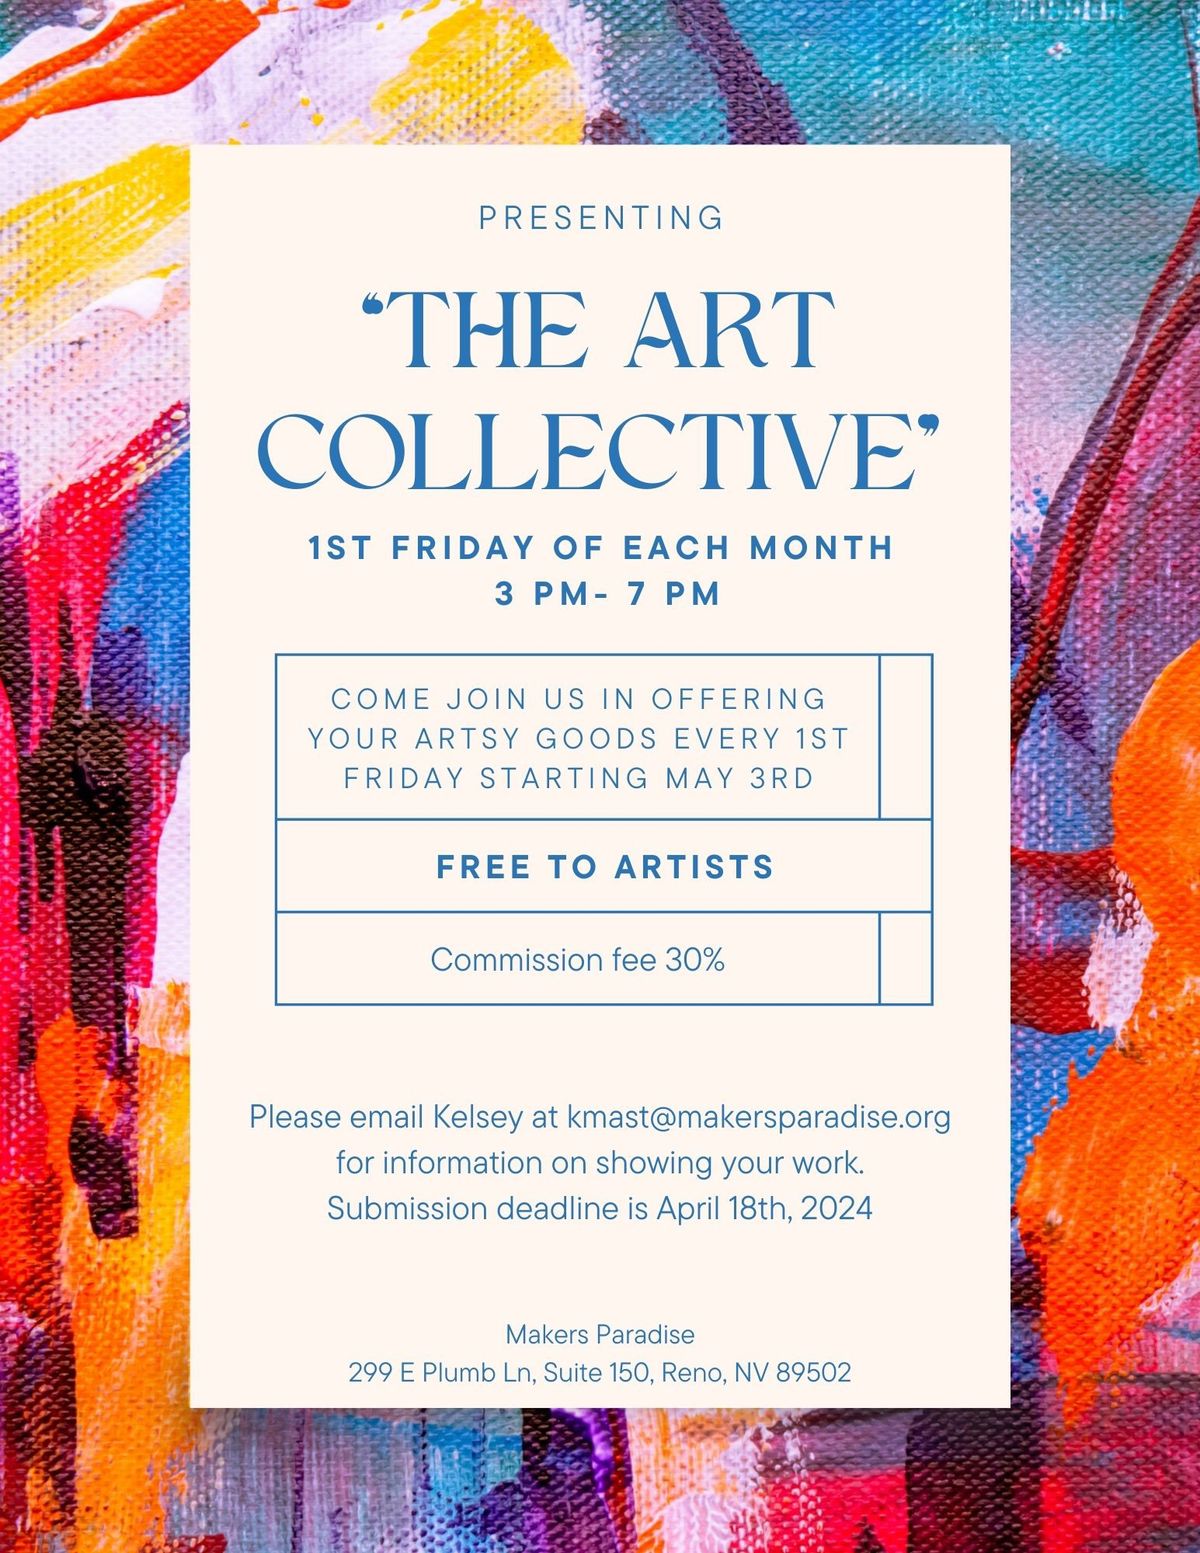 The Art Collective